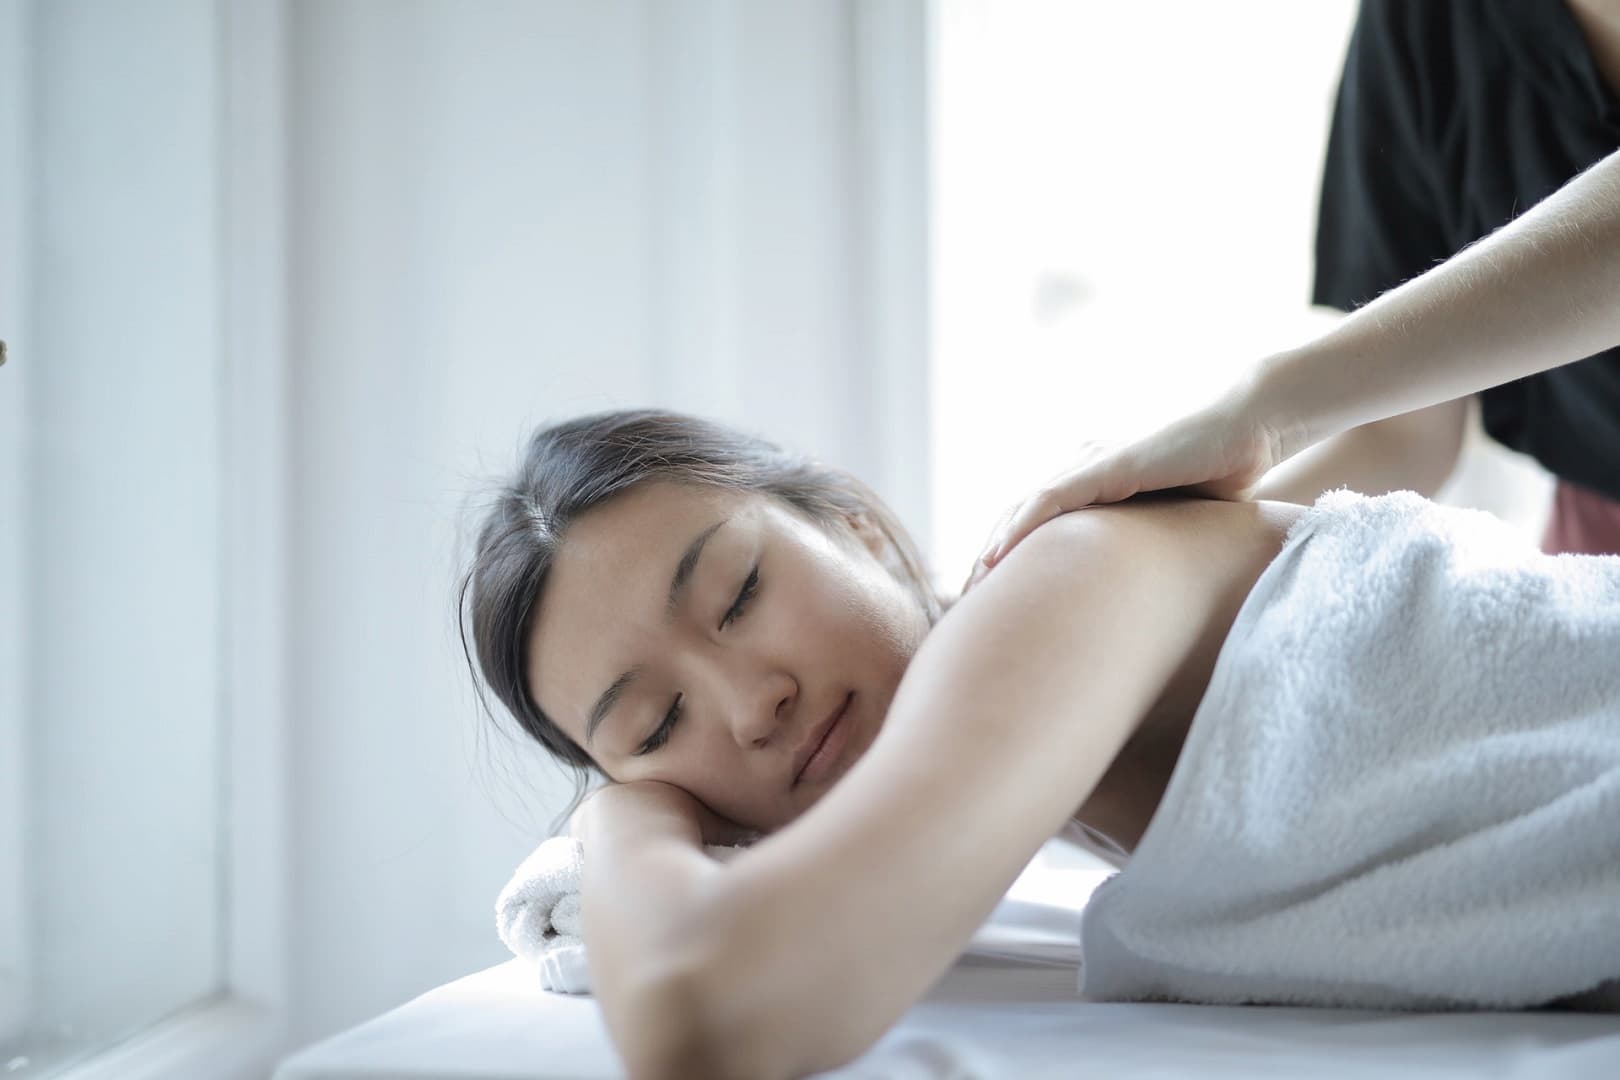 Chinese Massage Courses in Australia